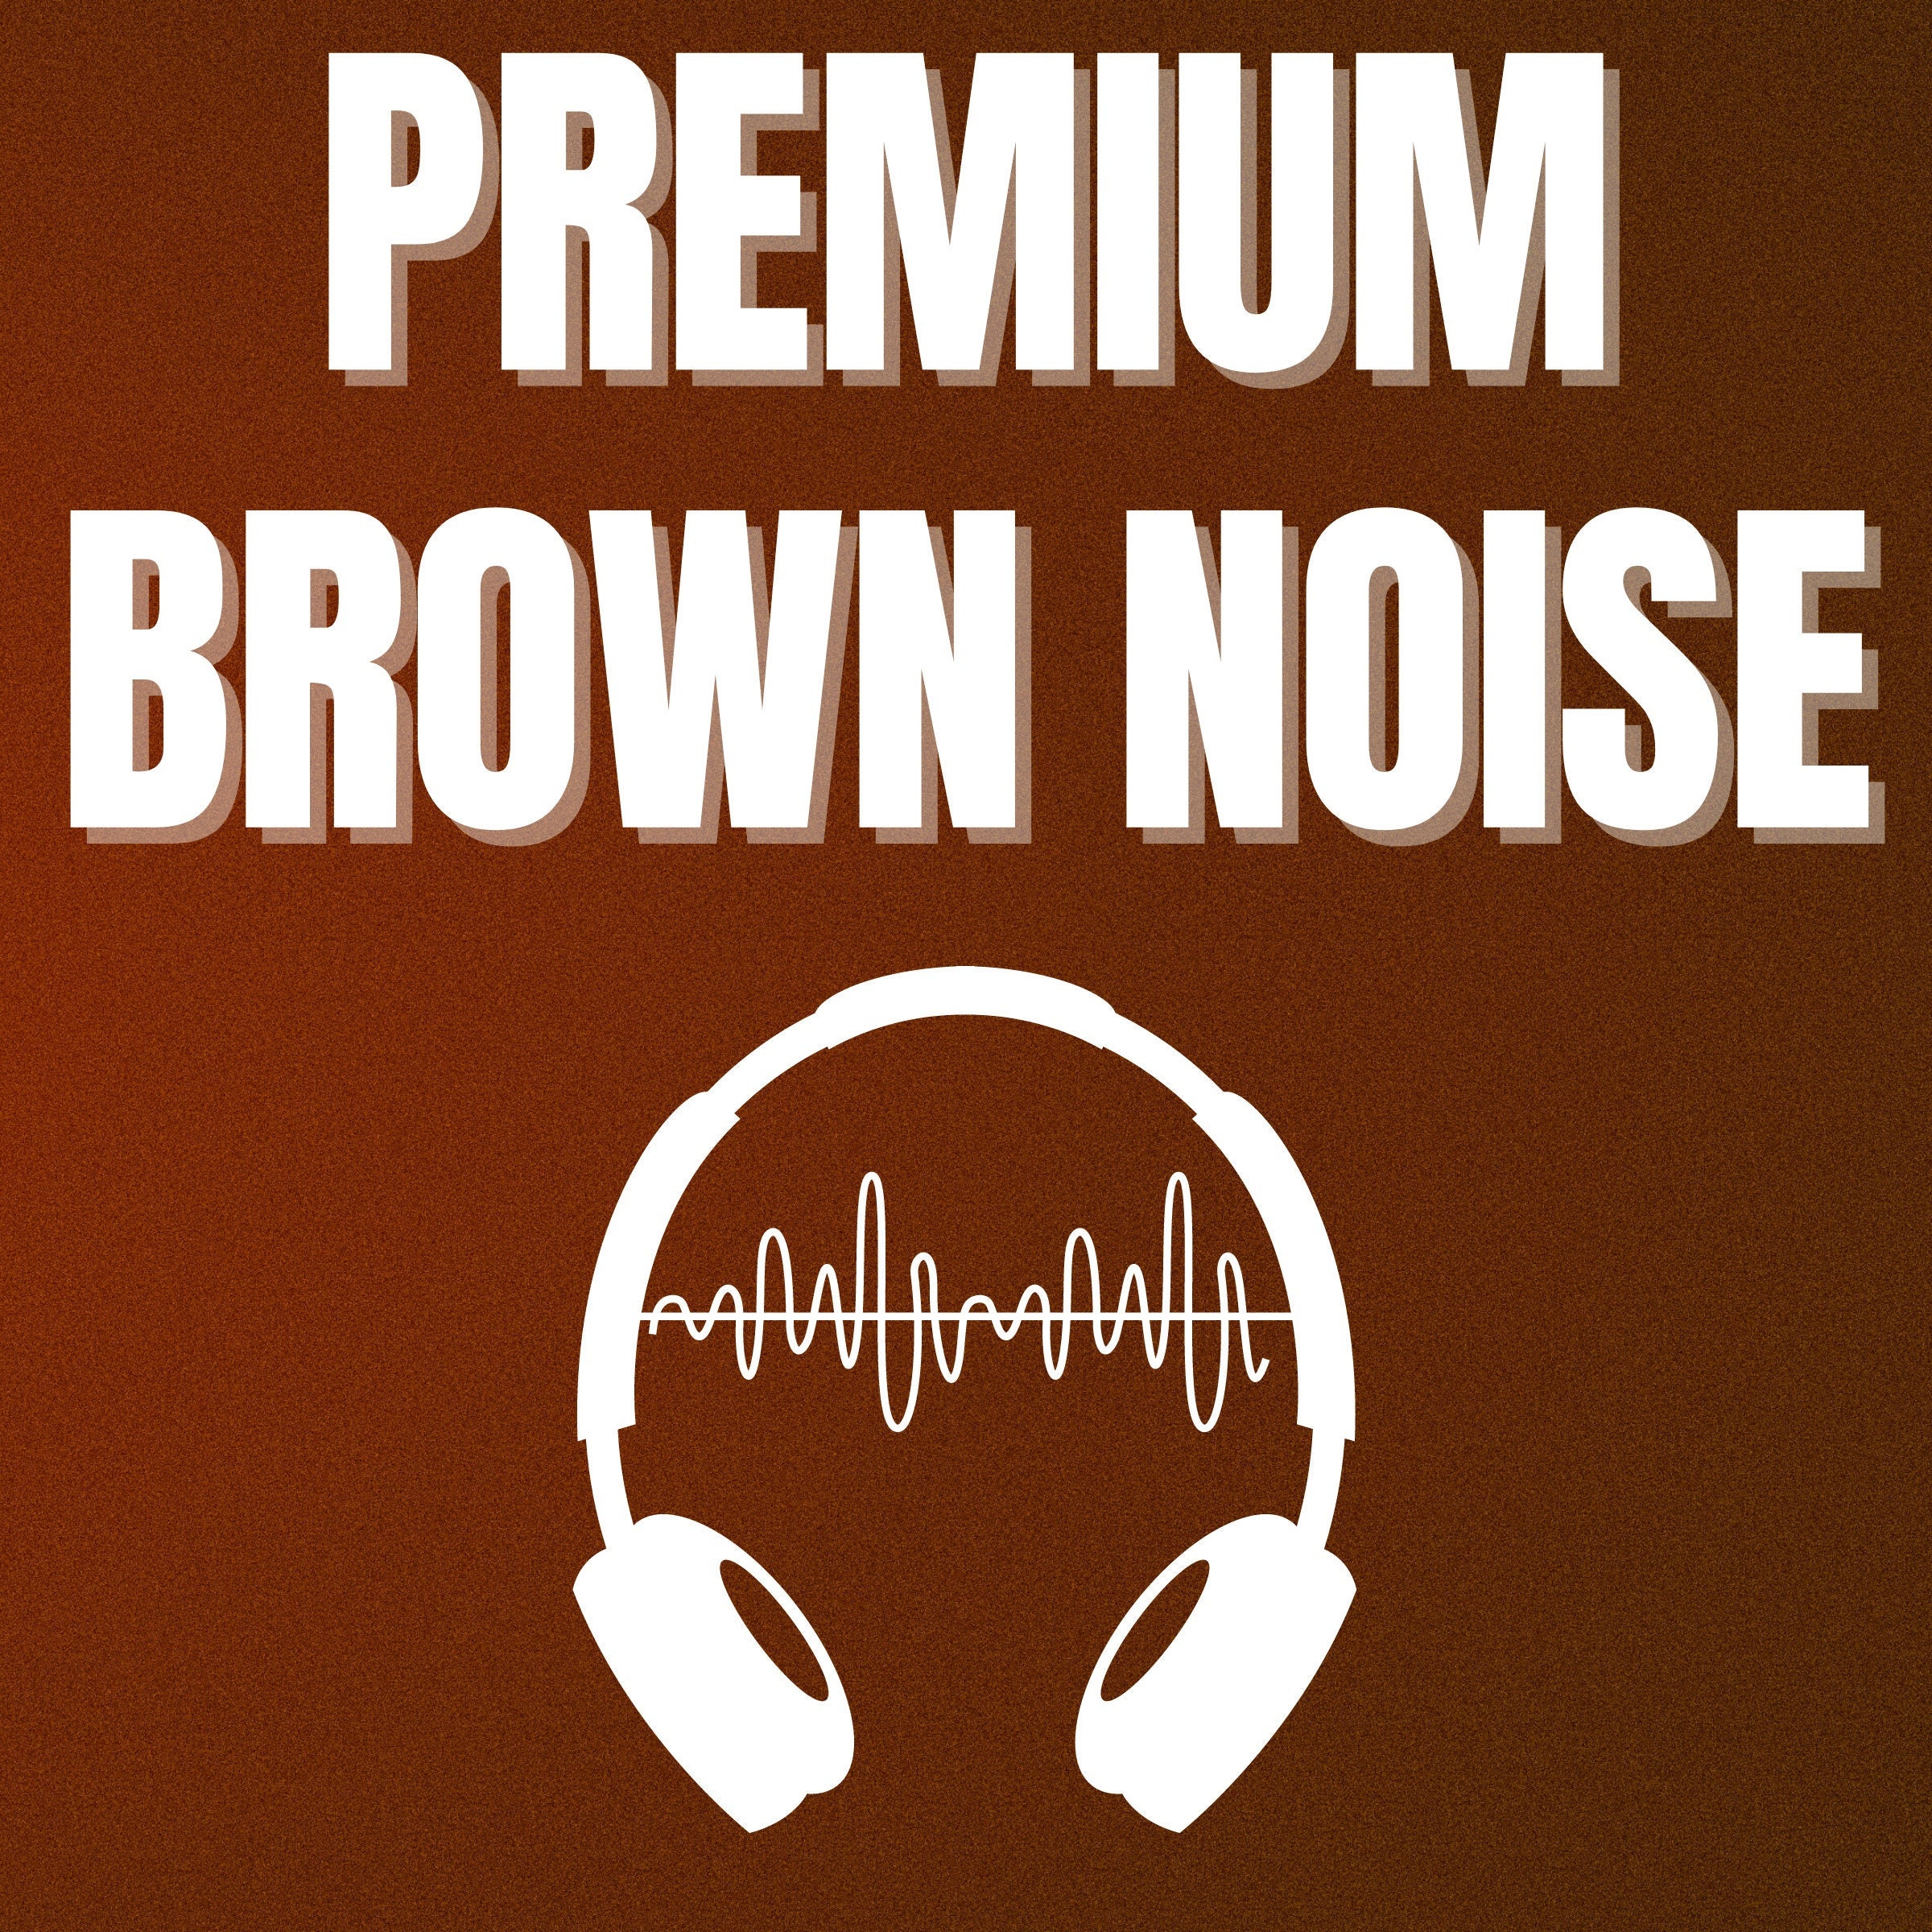 Brown Noise Sounds Great for Concentration Meditation